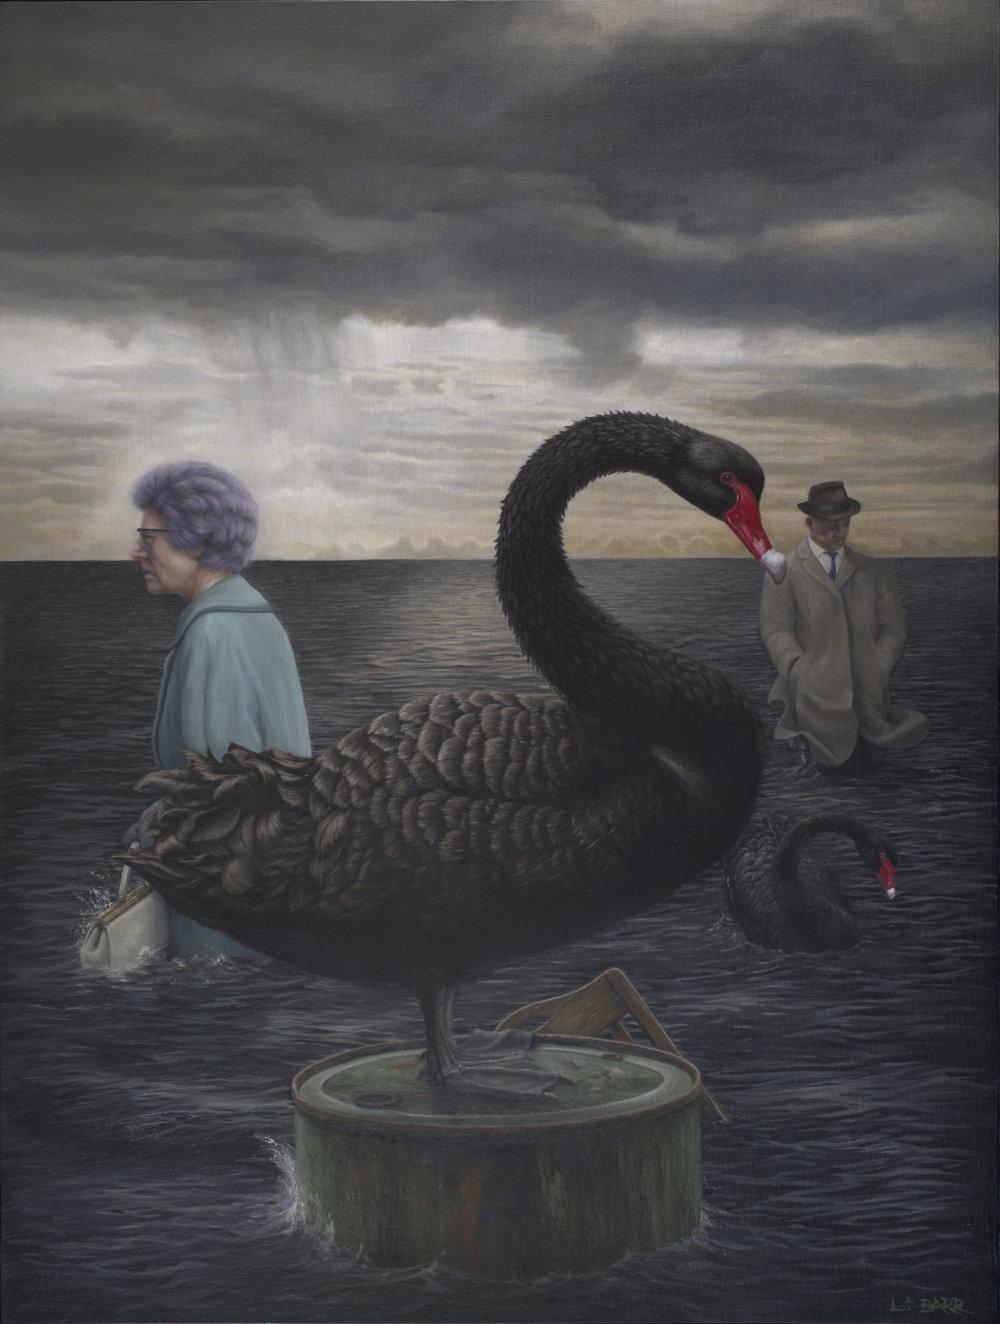 Painting of a black swan standing on an oil drum with people in the background.